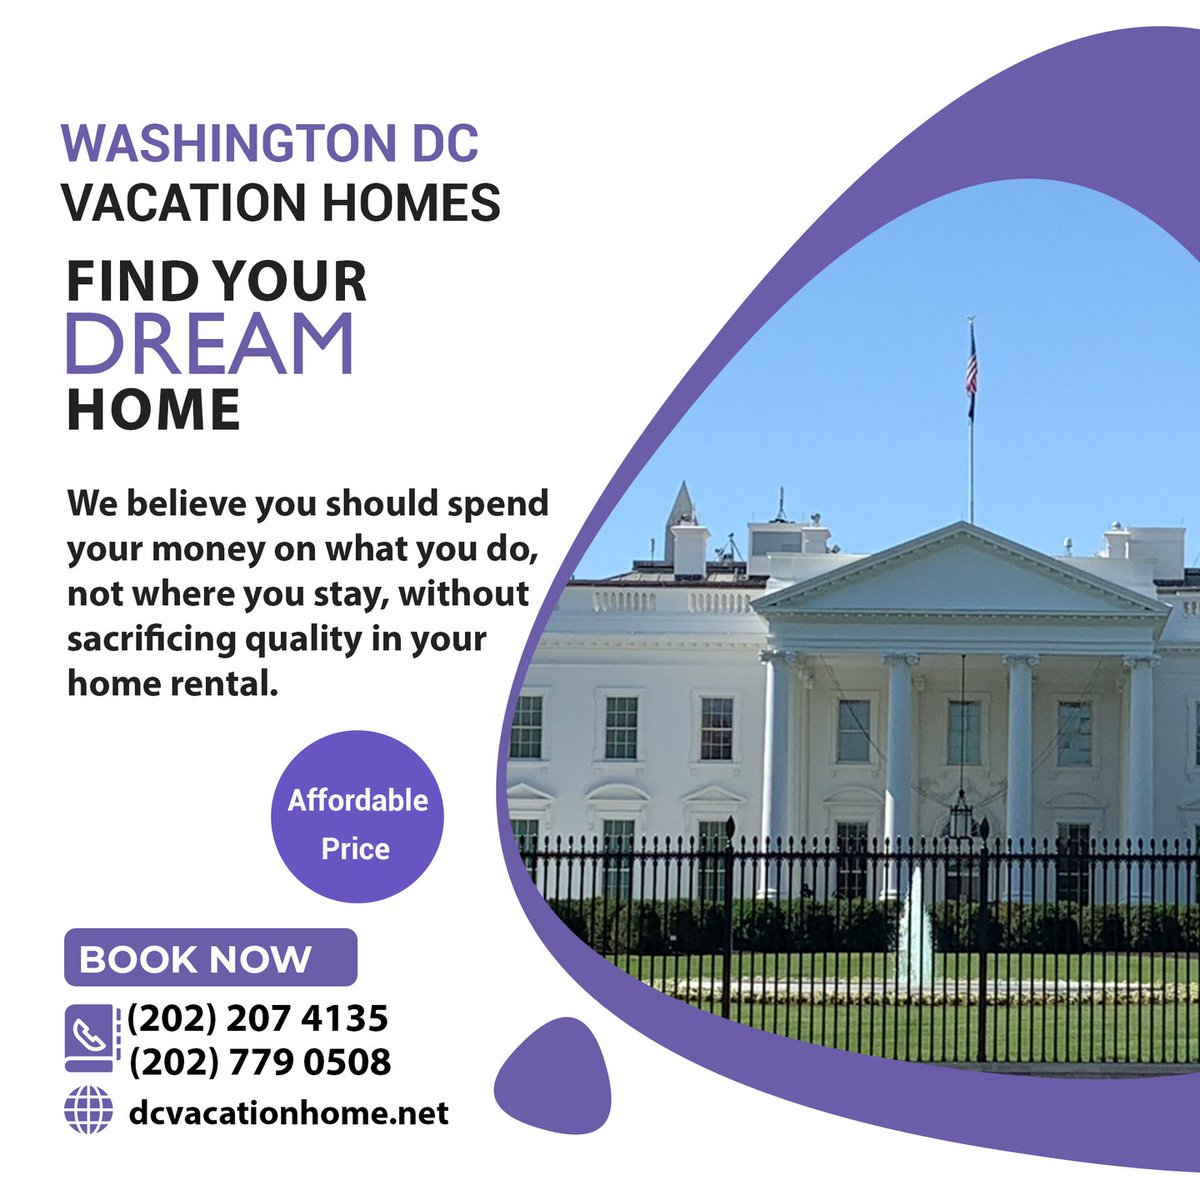 We #believe you should #spend your #money on what you do, not where you stay, without sacrificing #quality in your #homerental

#affordablehomes #home #room #Rent #rentalhome #rentalproperty #rentalroom #homeservices #homerental #dcvacation #property #travel #cleanroom #cleanhom